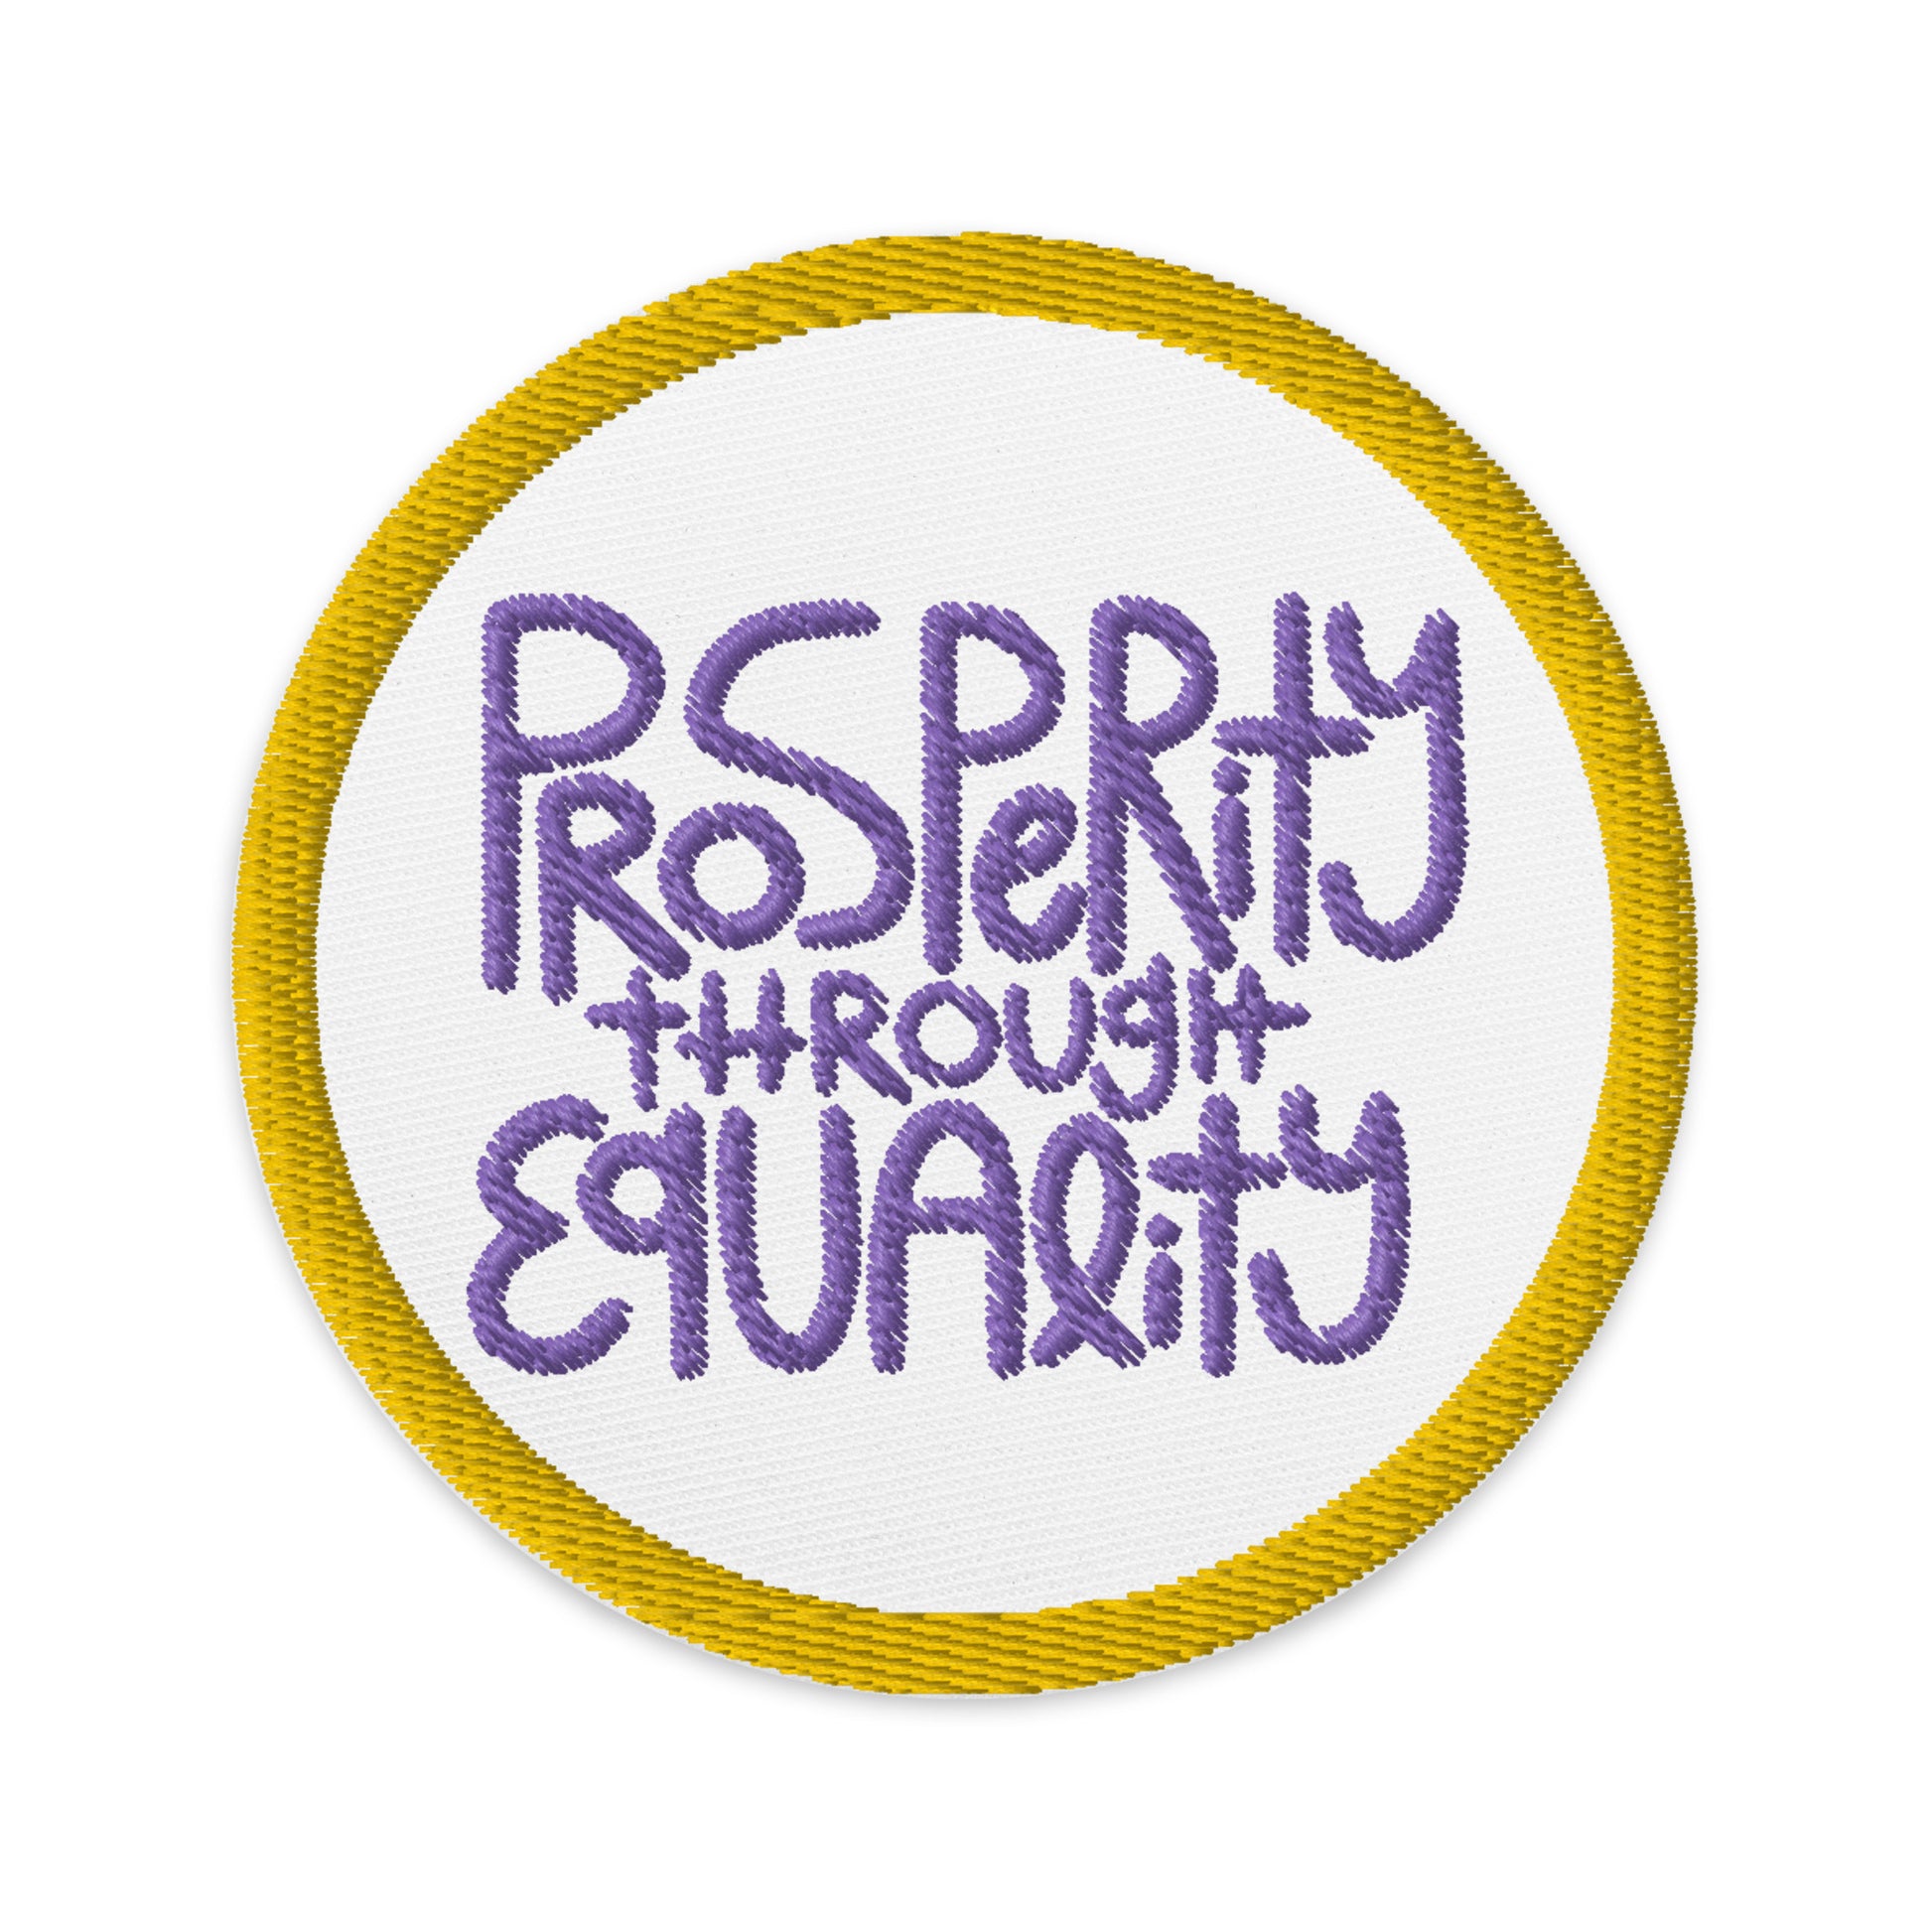 white, circular patch with an embroidered gold border. In the center of the patch with purple embroidery it read "Prosperity through equality."